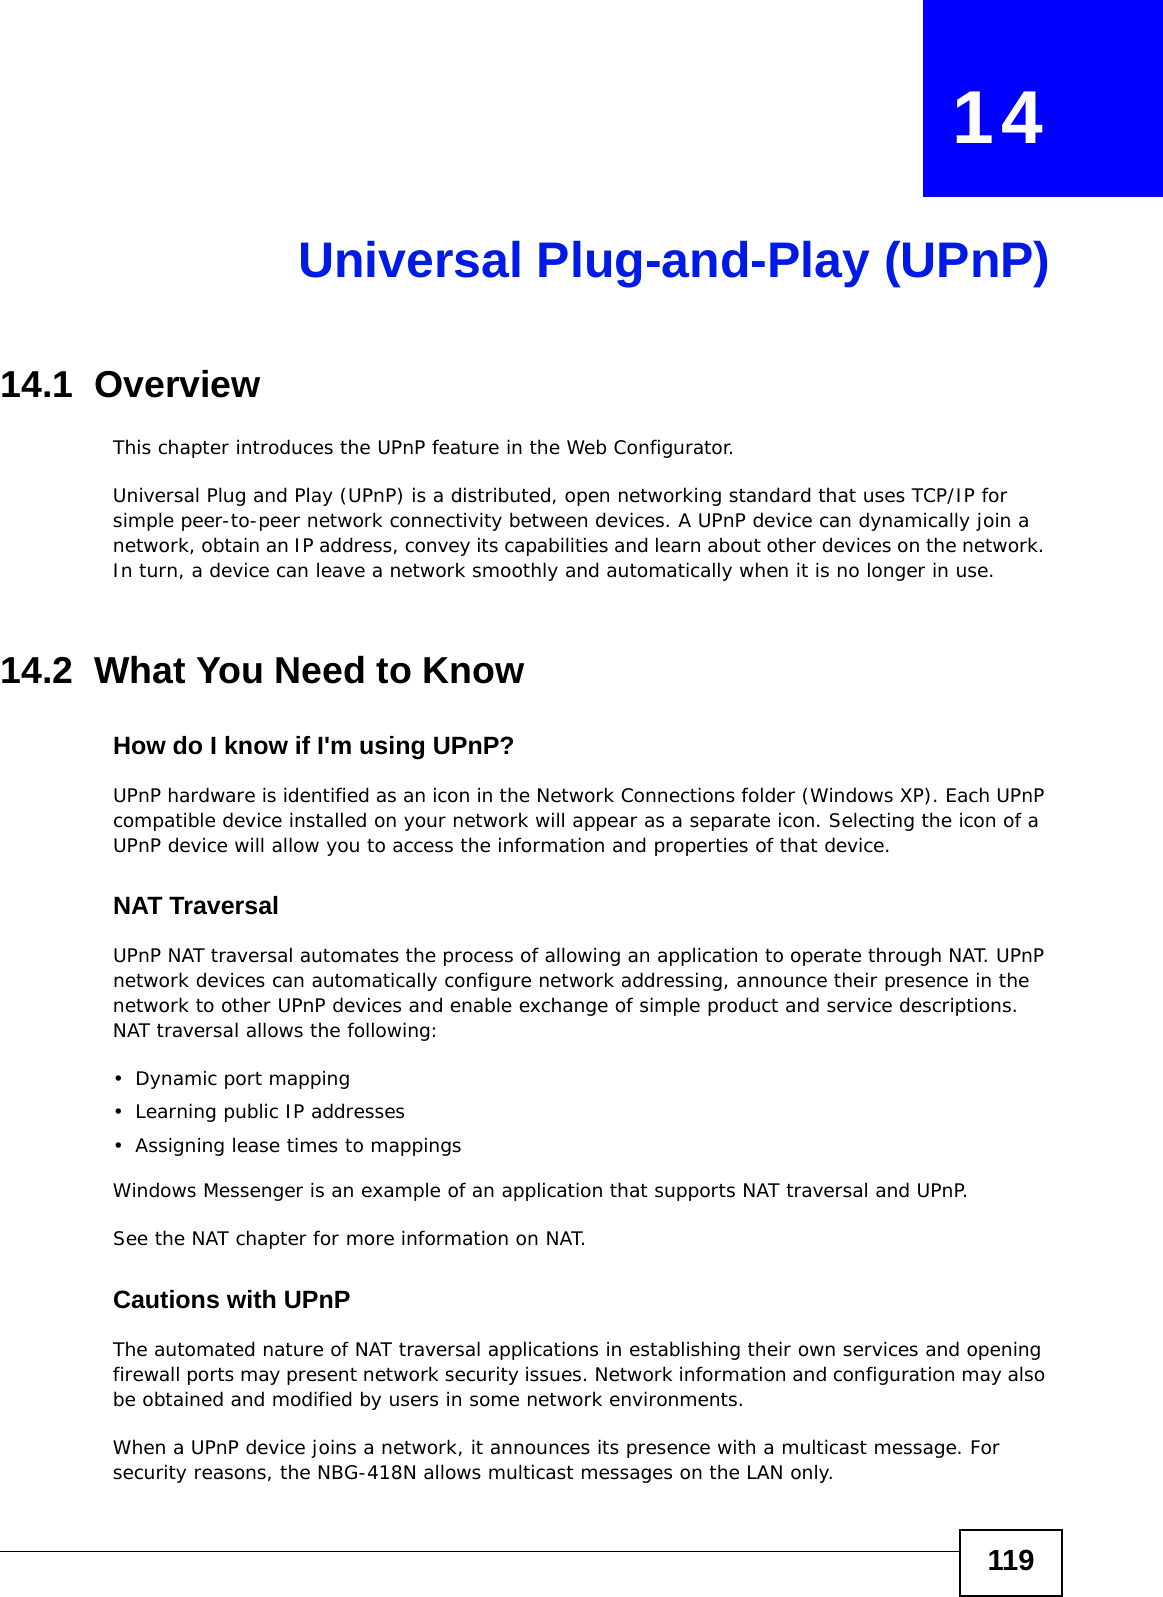 119CHAPTER   14Universal Plug-and-Play (UPnP)14.1  Overview This chapter introduces the UPnP feature in the Web Configurator.Universal Plug and Play (UPnP) is a distributed, open networking standard that uses TCP/IP for simple peer-to-peer network connectivity between devices. A UPnP device can dynamically join a network, obtain an IP address, convey its capabilities and learn about other devices on the network. In turn, a device can leave a network smoothly and automatically when it is no longer in use.14.2  What You Need to KnowHow do I know if I&apos;m using UPnP? UPnP hardware is identified as an icon in the Network Connections folder (Windows XP). Each UPnP compatible device installed on your network will appear as a separate icon. Selecting the icon of a UPnP device will allow you to access the information and properties of that device. NAT TraversalUPnP NAT traversal automates the process of allowing an application to operate through NAT. UPnP network devices can automatically configure network addressing, announce their presence in the network to other UPnP devices and enable exchange of simple product and service descriptions. NAT traversal allows the following:• Dynamic port mapping• Learning public IP addresses• Assigning lease times to mappingsWindows Messenger is an example of an application that supports NAT traversal and UPnP. See the NAT chapter for more information on NAT.Cautions with UPnPThe automated nature of NAT traversal applications in establishing their own services and opening firewall ports may present network security issues. Network information and configuration may also be obtained and modified by users in some network environments. When a UPnP device joins a network, it announces its presence with a multicast message. For security reasons, the NBG-418N allows multicast messages on the LAN only.